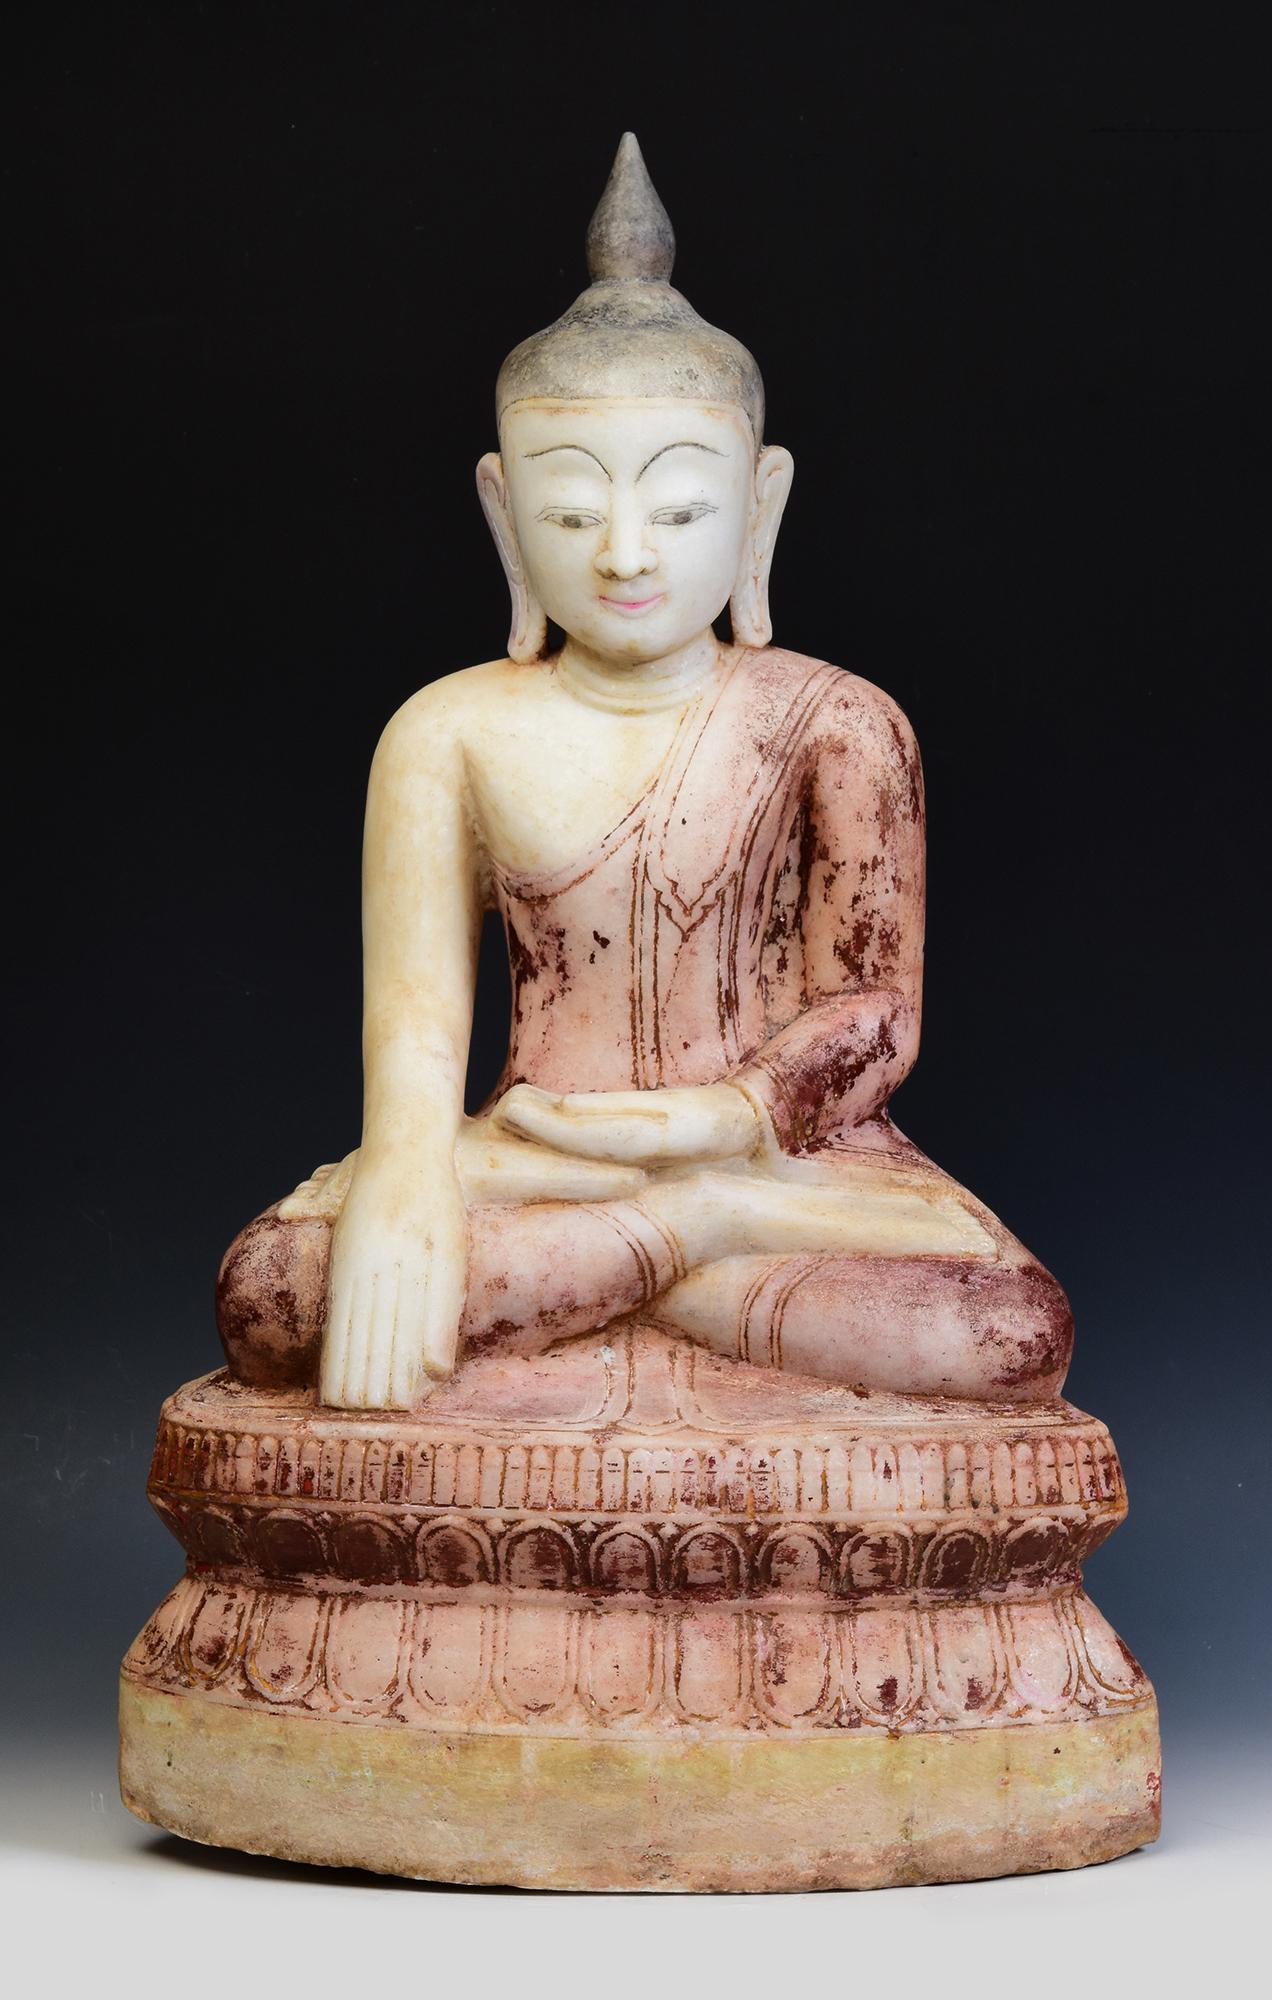 Antique Burmese alabaster Buddha sitting in Mara Vijaya (calling the earth to witness) posture on a base.

Age: Burma, Shan Period, 17th - 18th Century
Size: Height 64.3 C.M. / Width 38 C.M. / Depth 21.5 C.M.
Condition: Nice condition overall (some